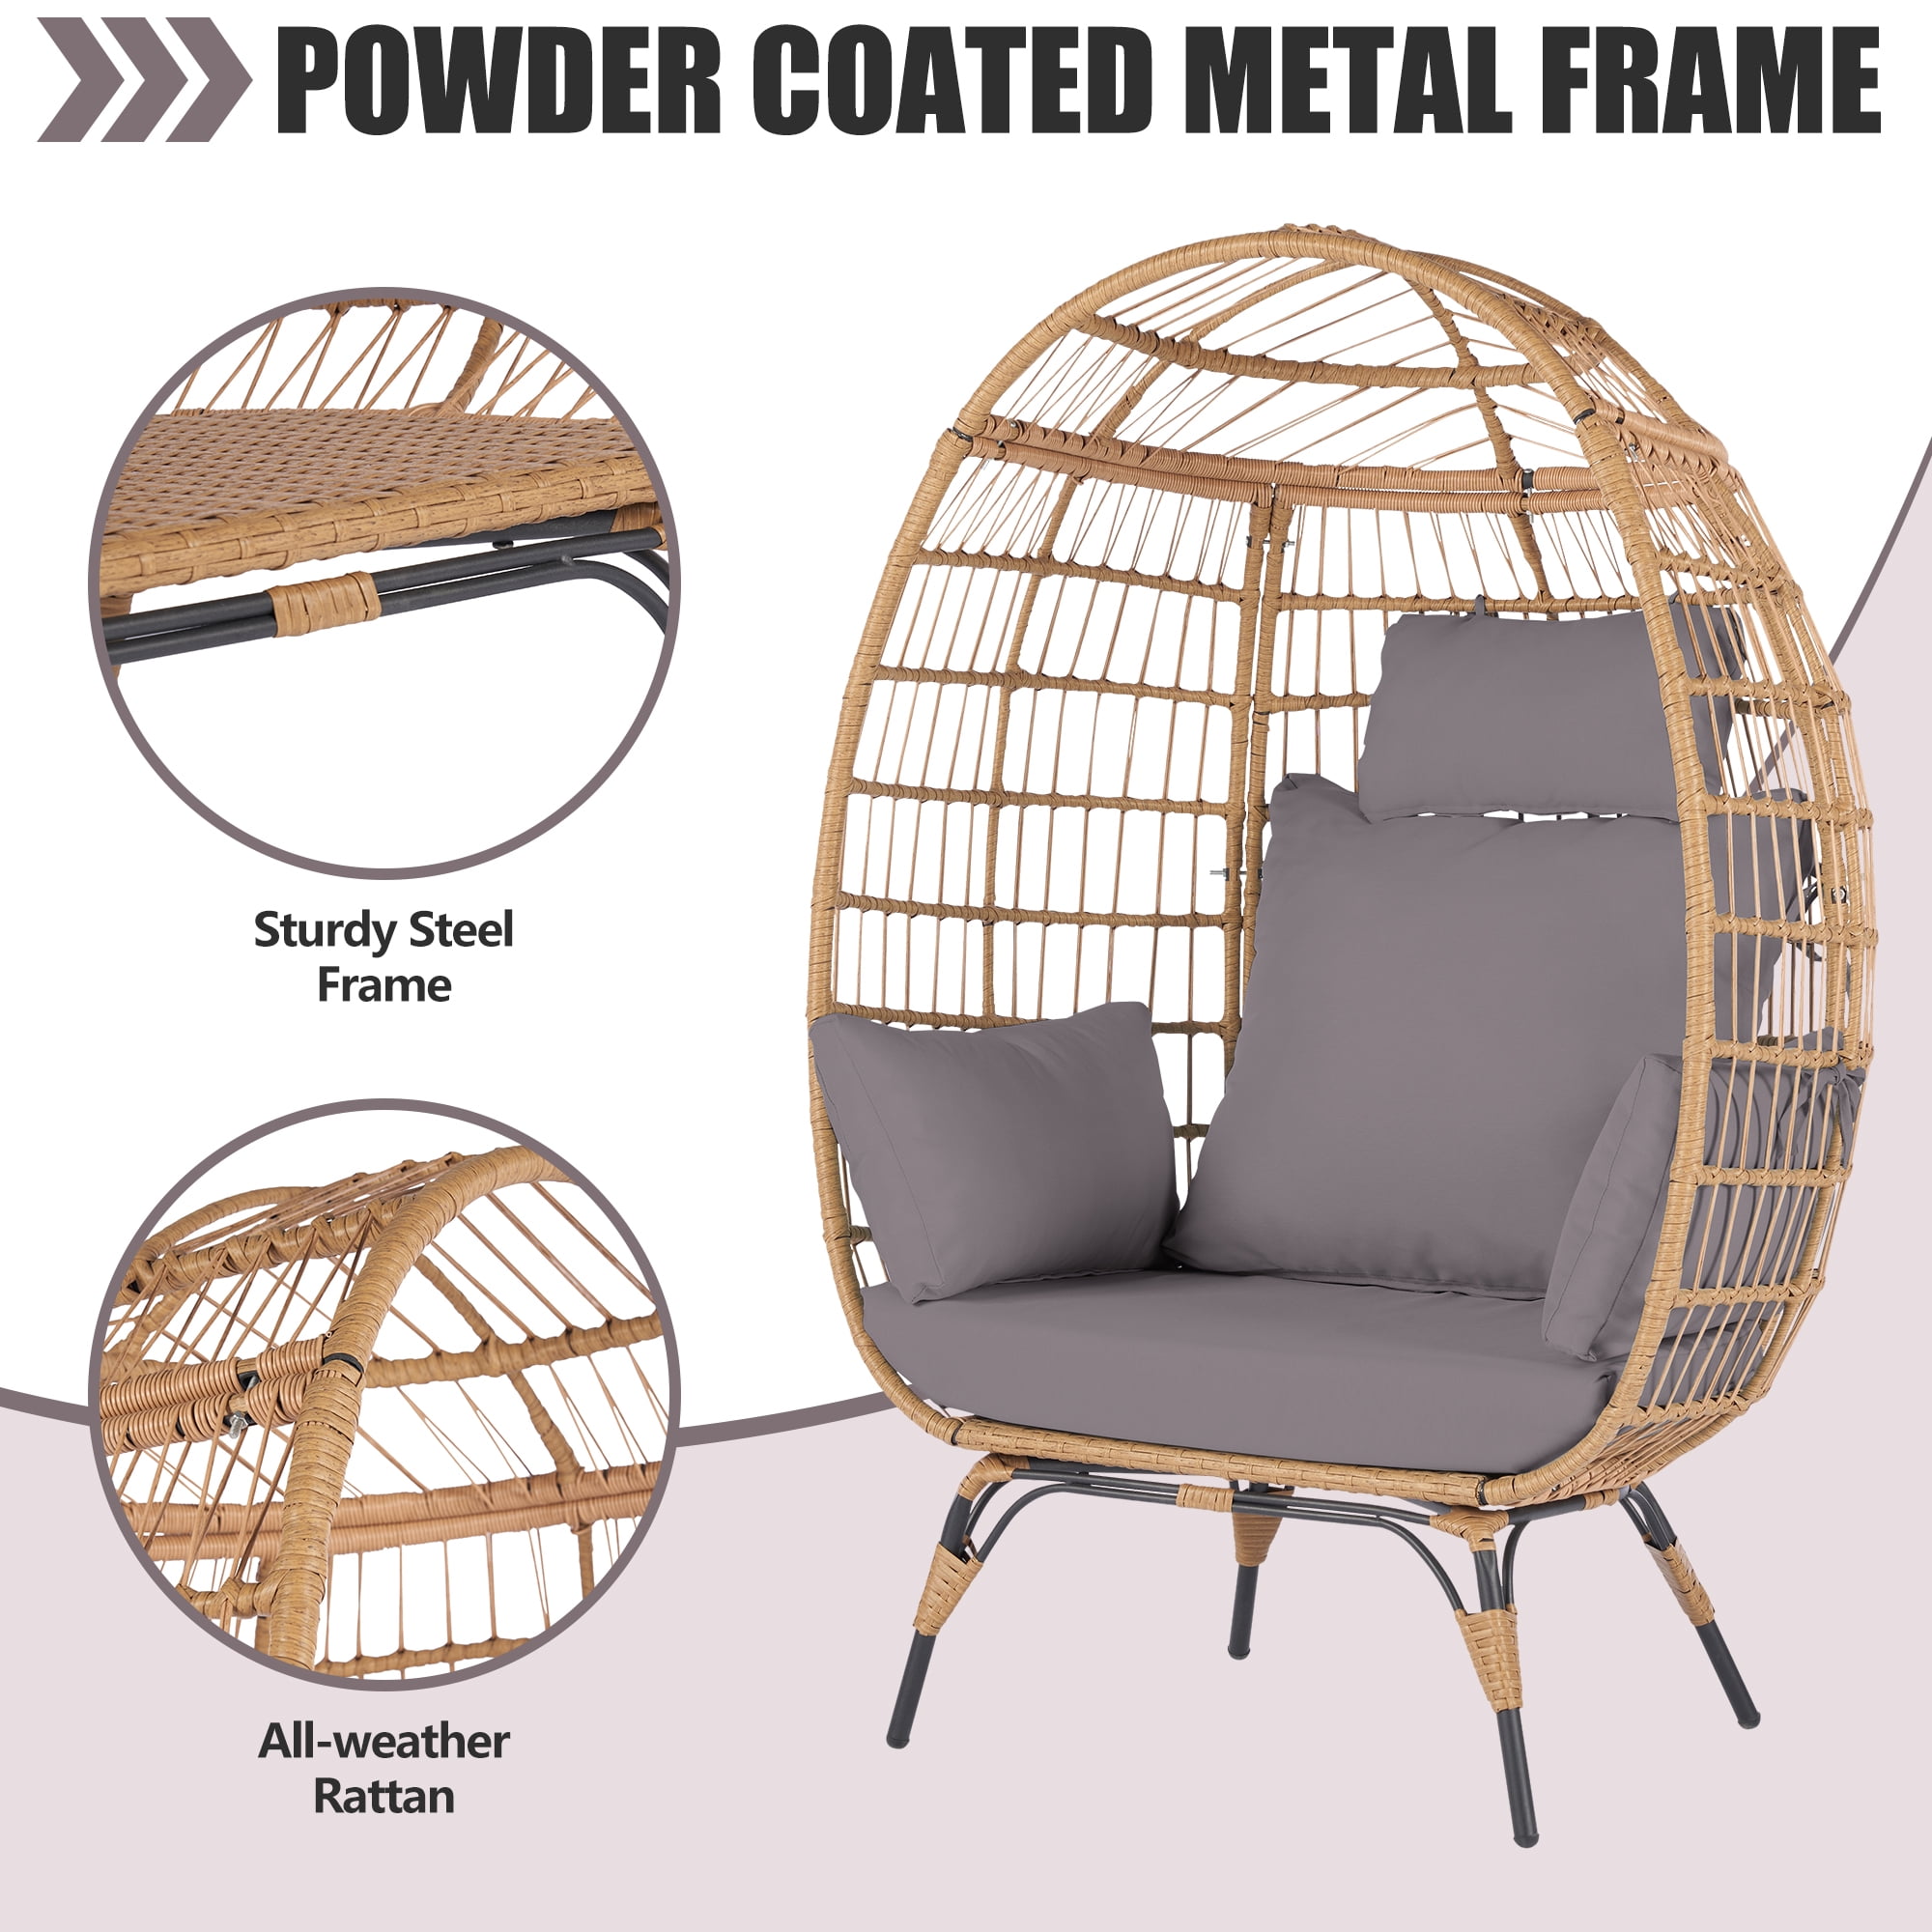 Grand patio Outdoor & Indoor Egg Chair 2PC, PE Wicker Open Weave Wood Grain  Finish Oversized Egg Cocoon Chairs with Stand Lounge Chair Comfortable for